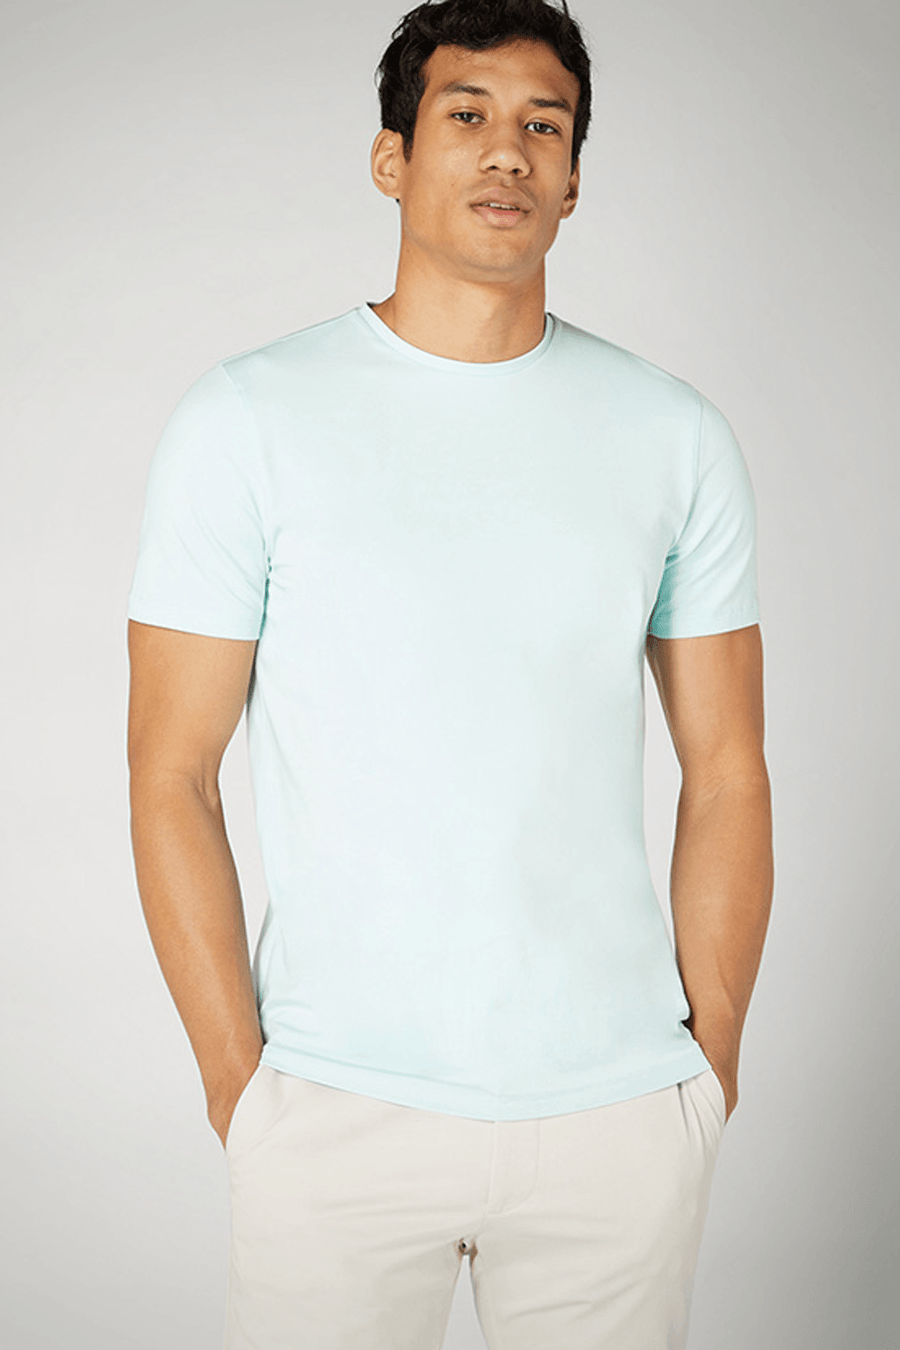 Buy the Remus Uomo Tapered Fit Cotton-Stretch T-Shirt in Turquoise at Intro. Spend £50 for free UK delivery. Official stockists. We ship worldwide.